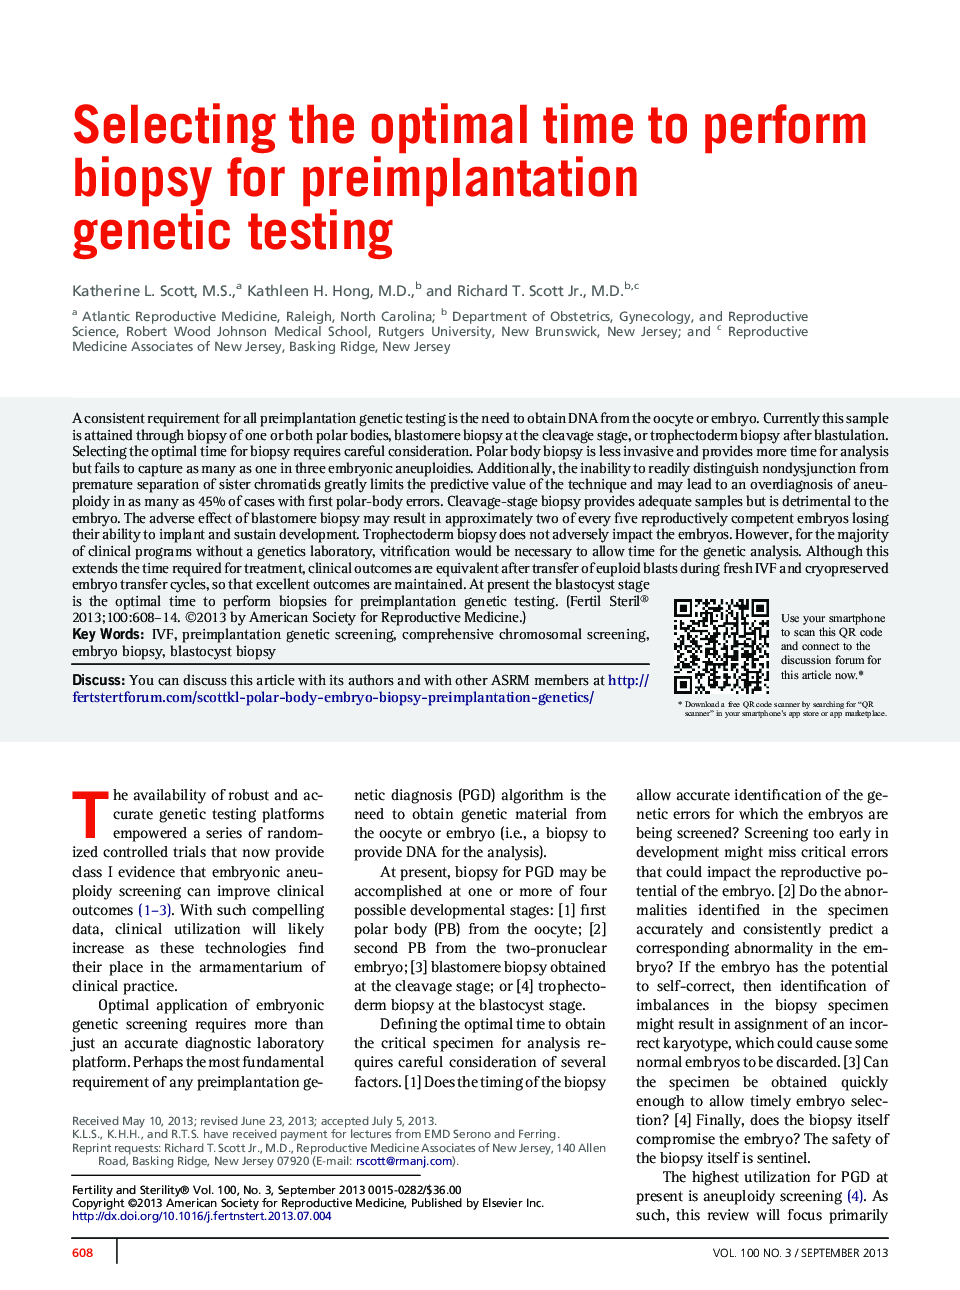 Selecting the optimal time to perform biopsy for preimplantation genetic testing 